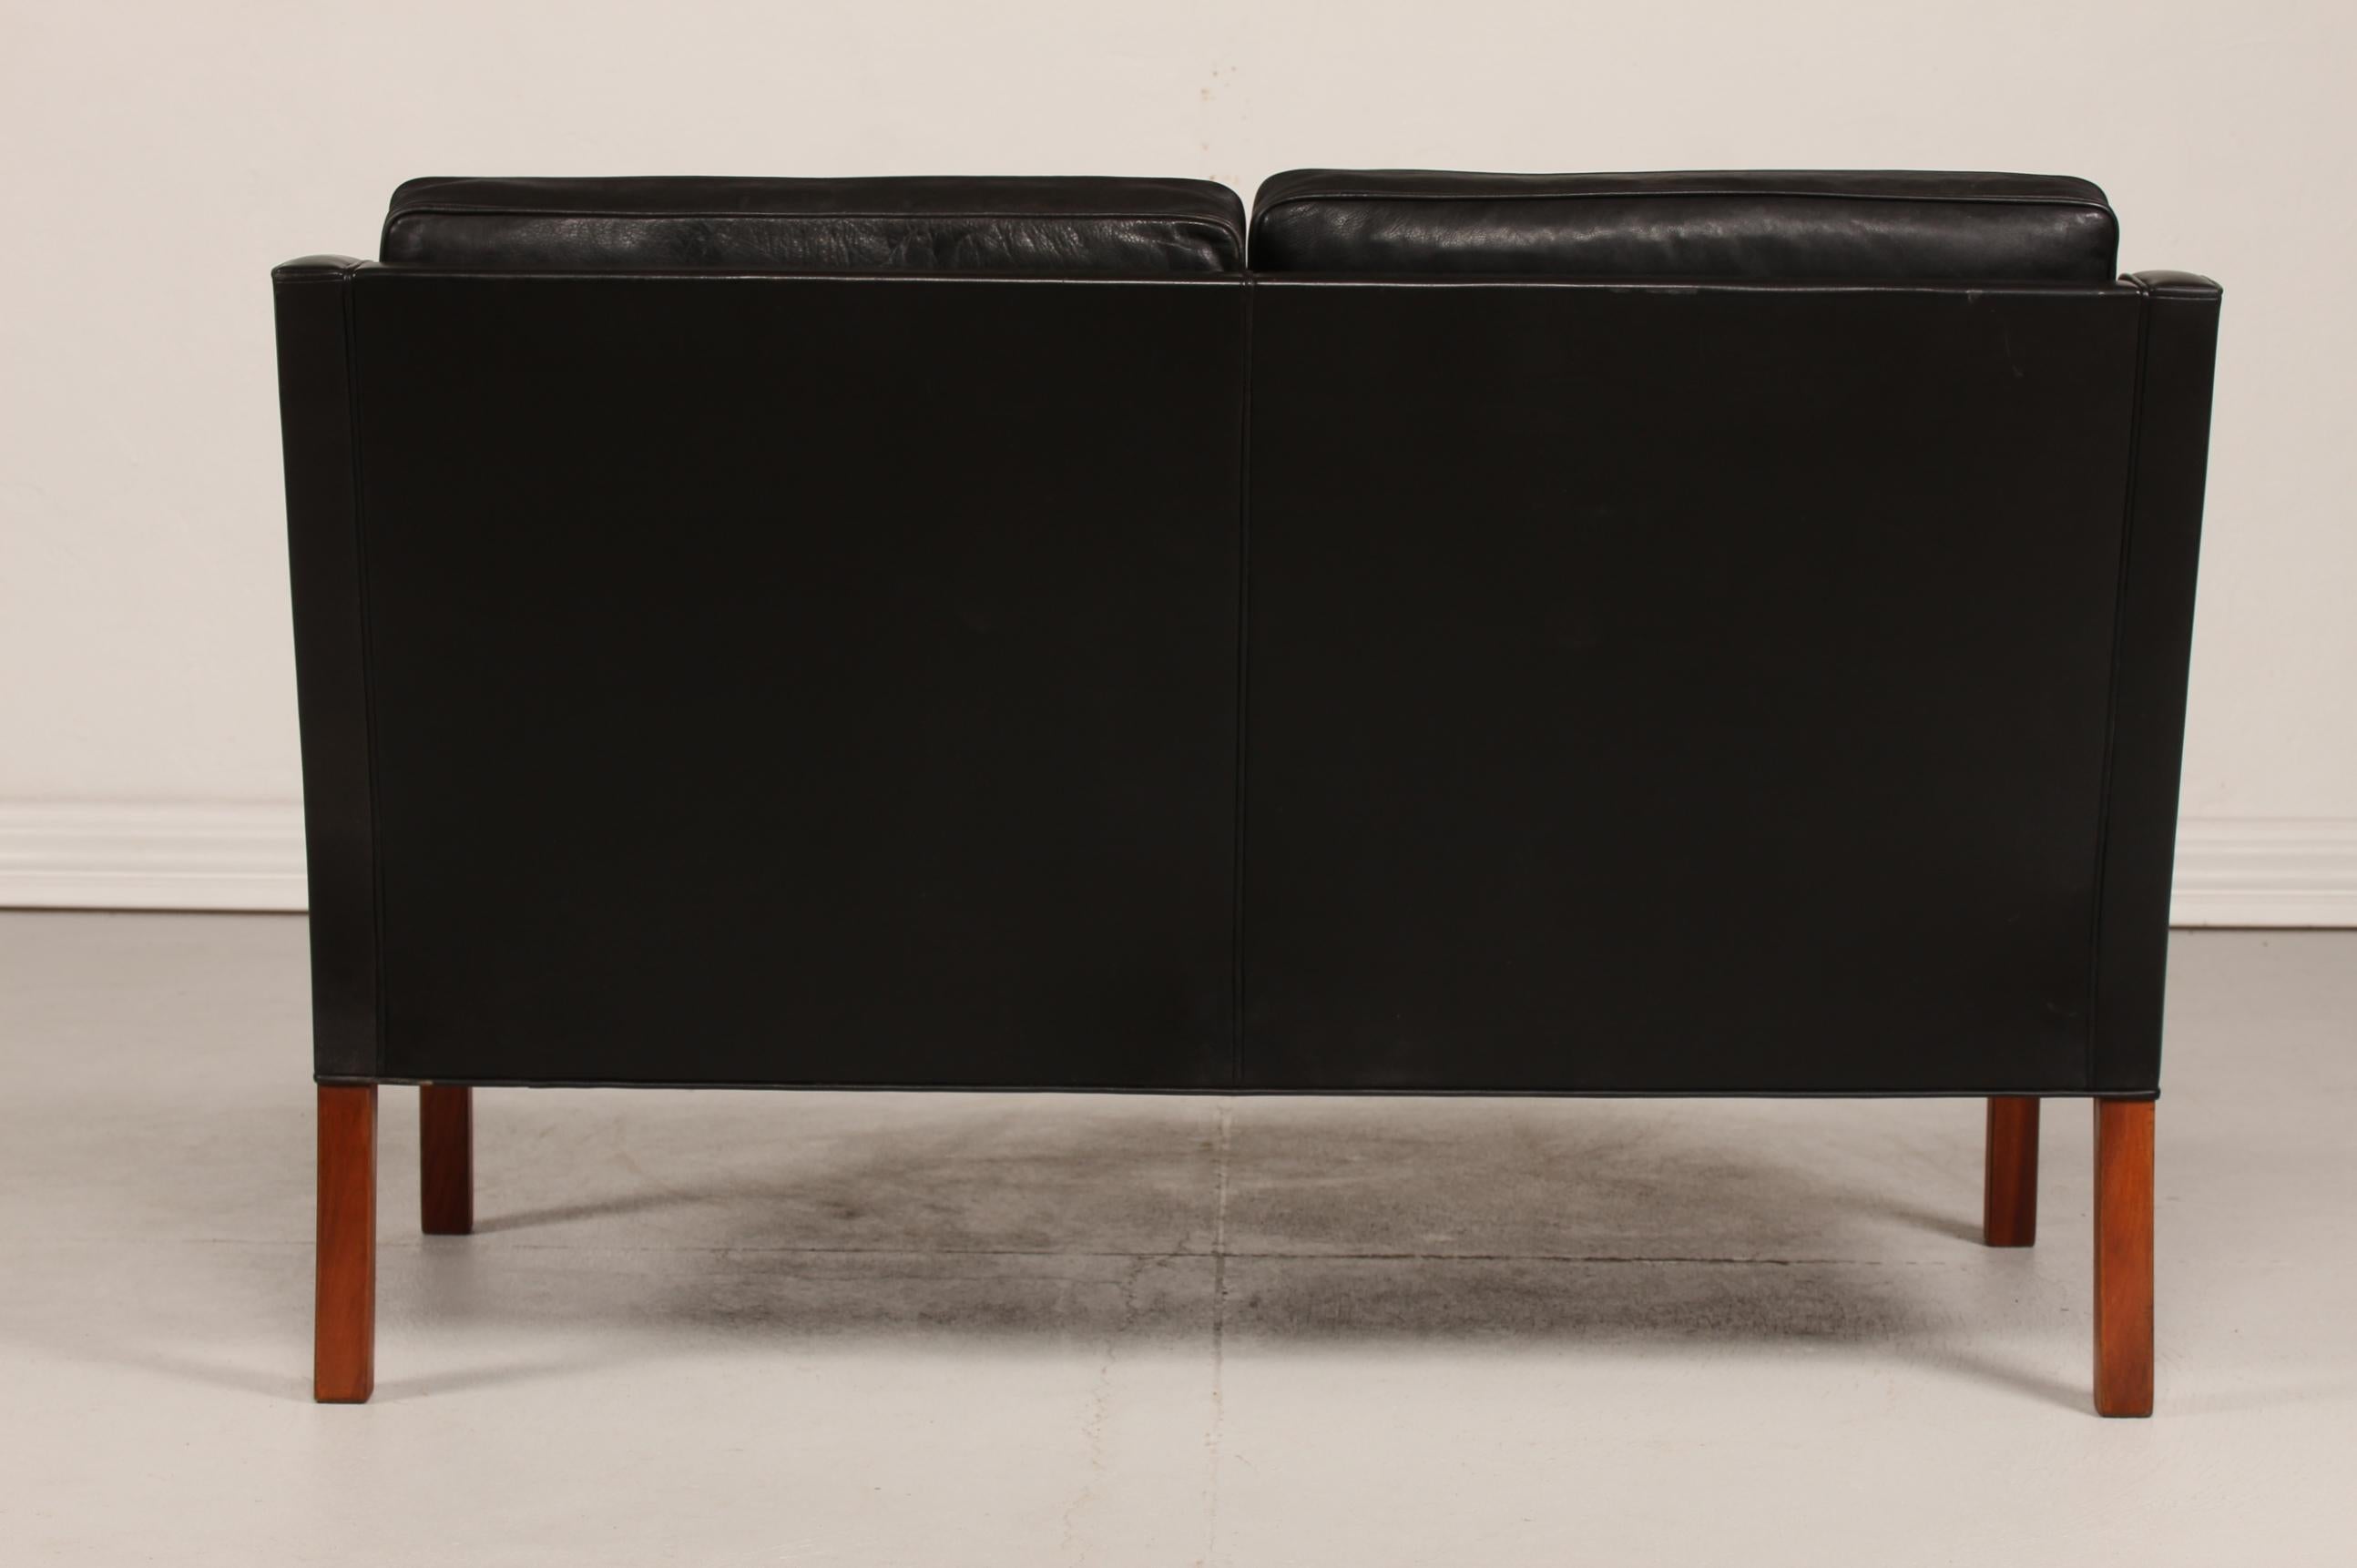 Late 20th Century Børge Mogensen Sofa 2208 with Black Leather by Fredericia Furniture, Denmark For Sale